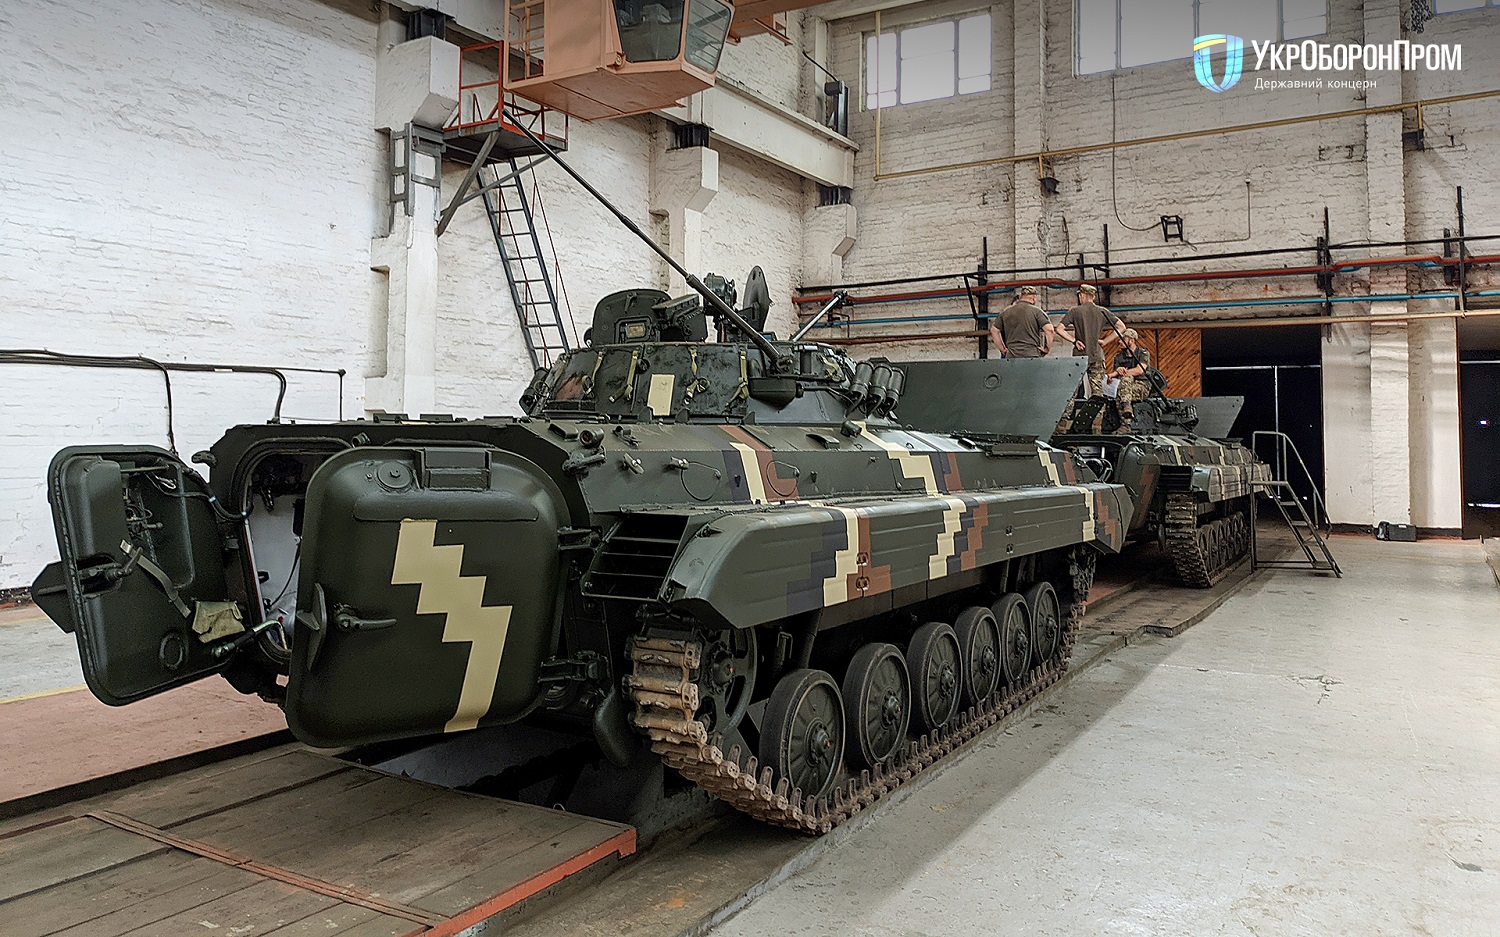 Zhytomyr Armored Plant Delivered Upgraded BMP-2 Infantry Fighting Vehicle to Ukrainian Army